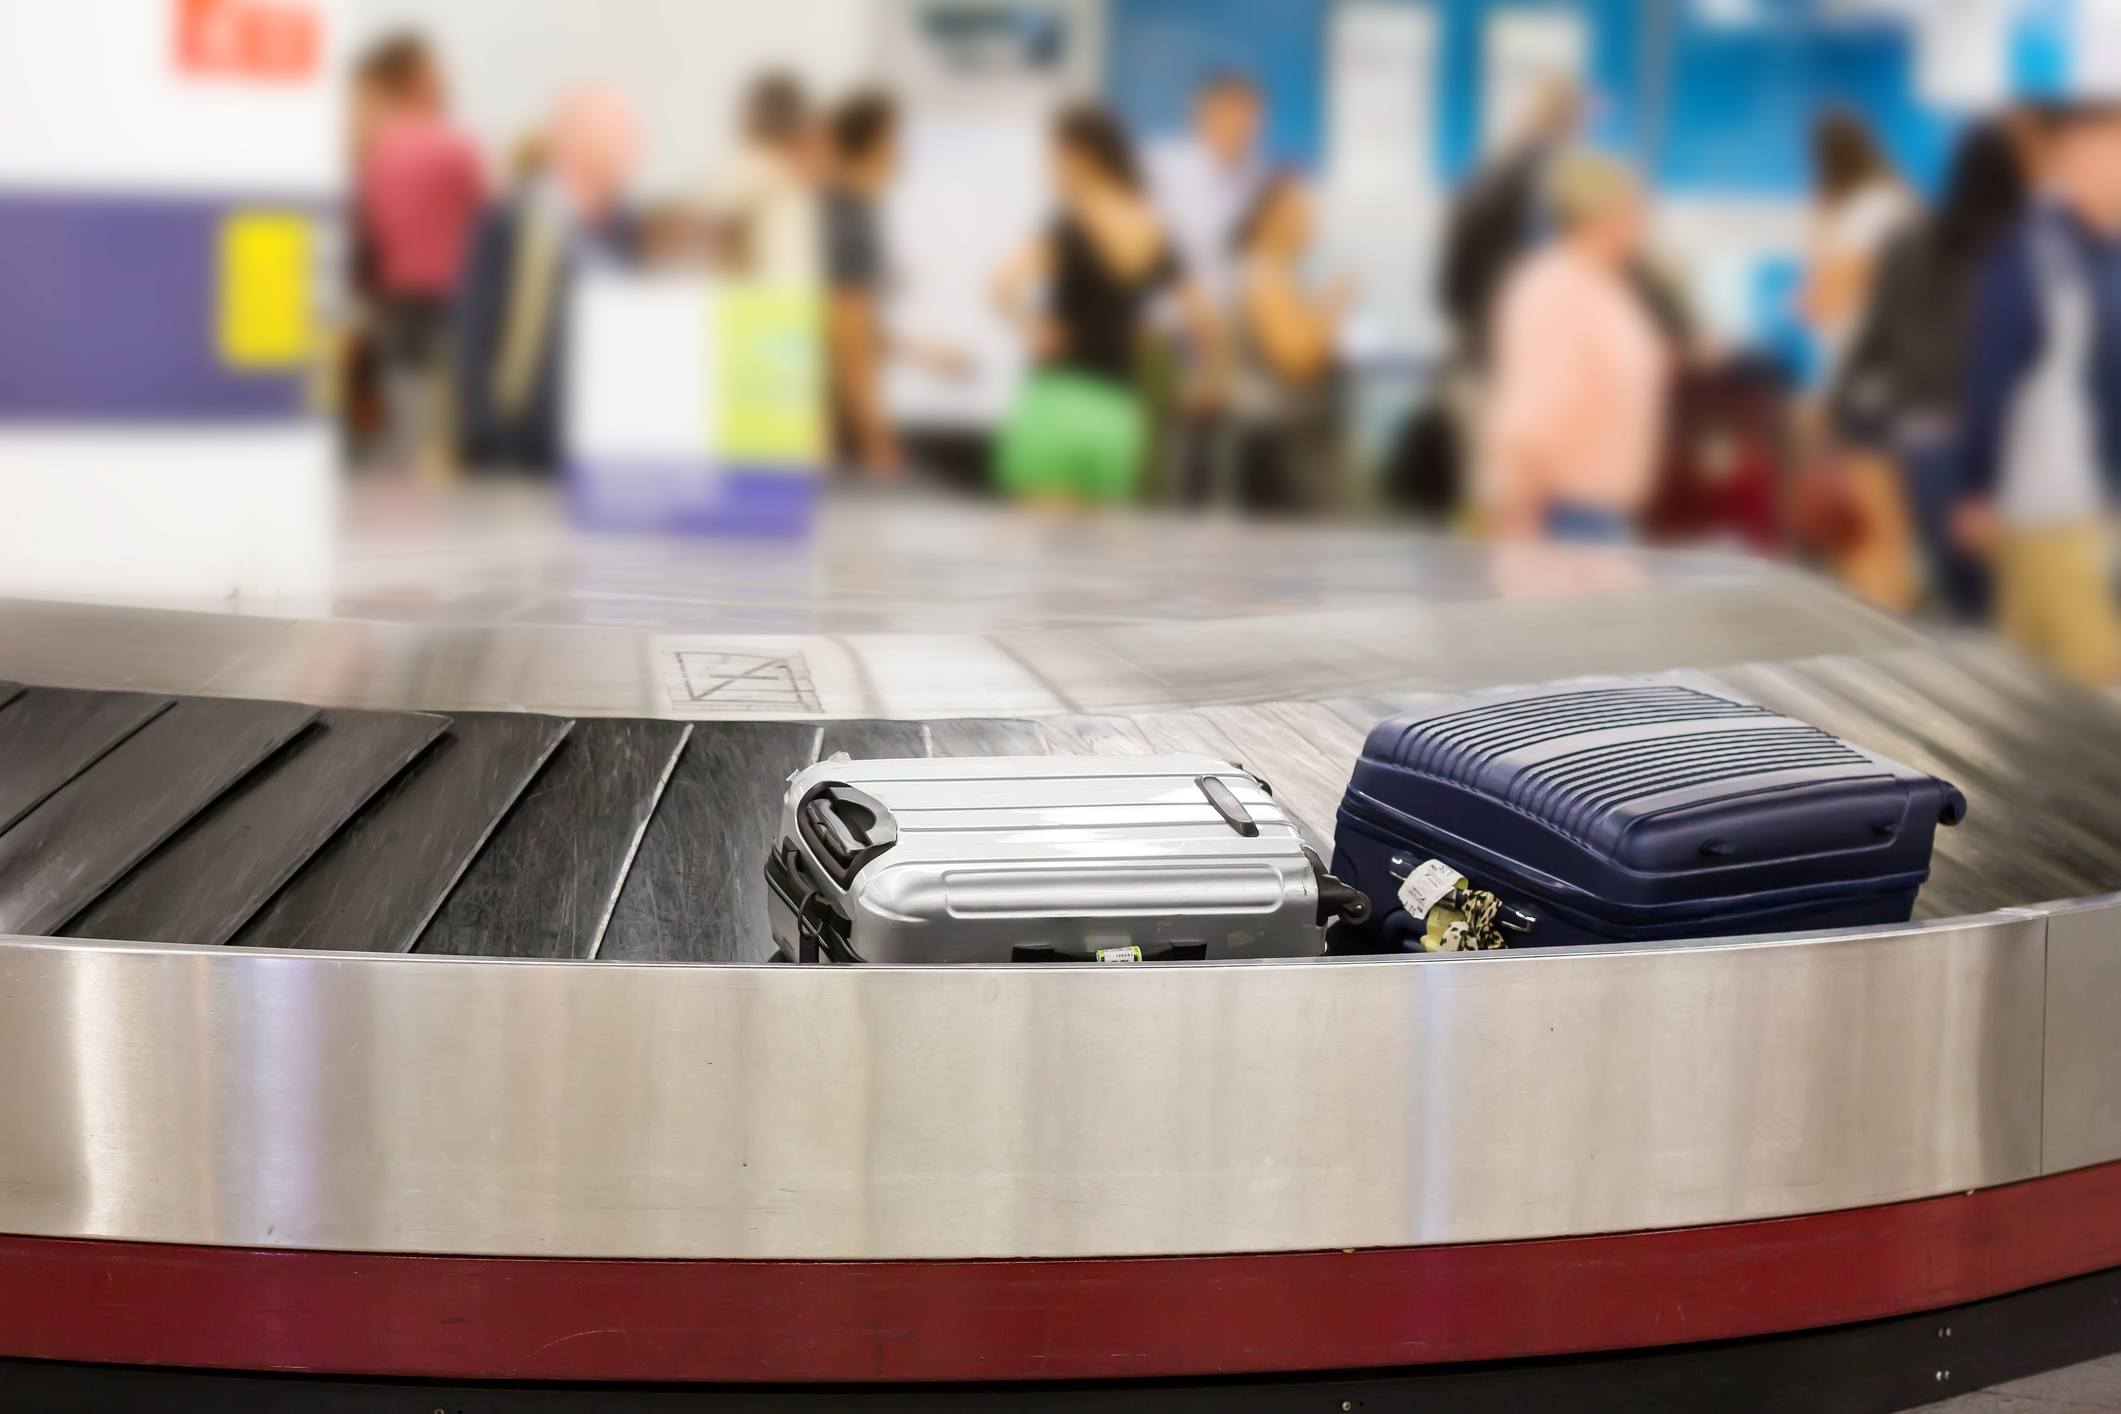 Two suitcases on the luggage belt in the airport